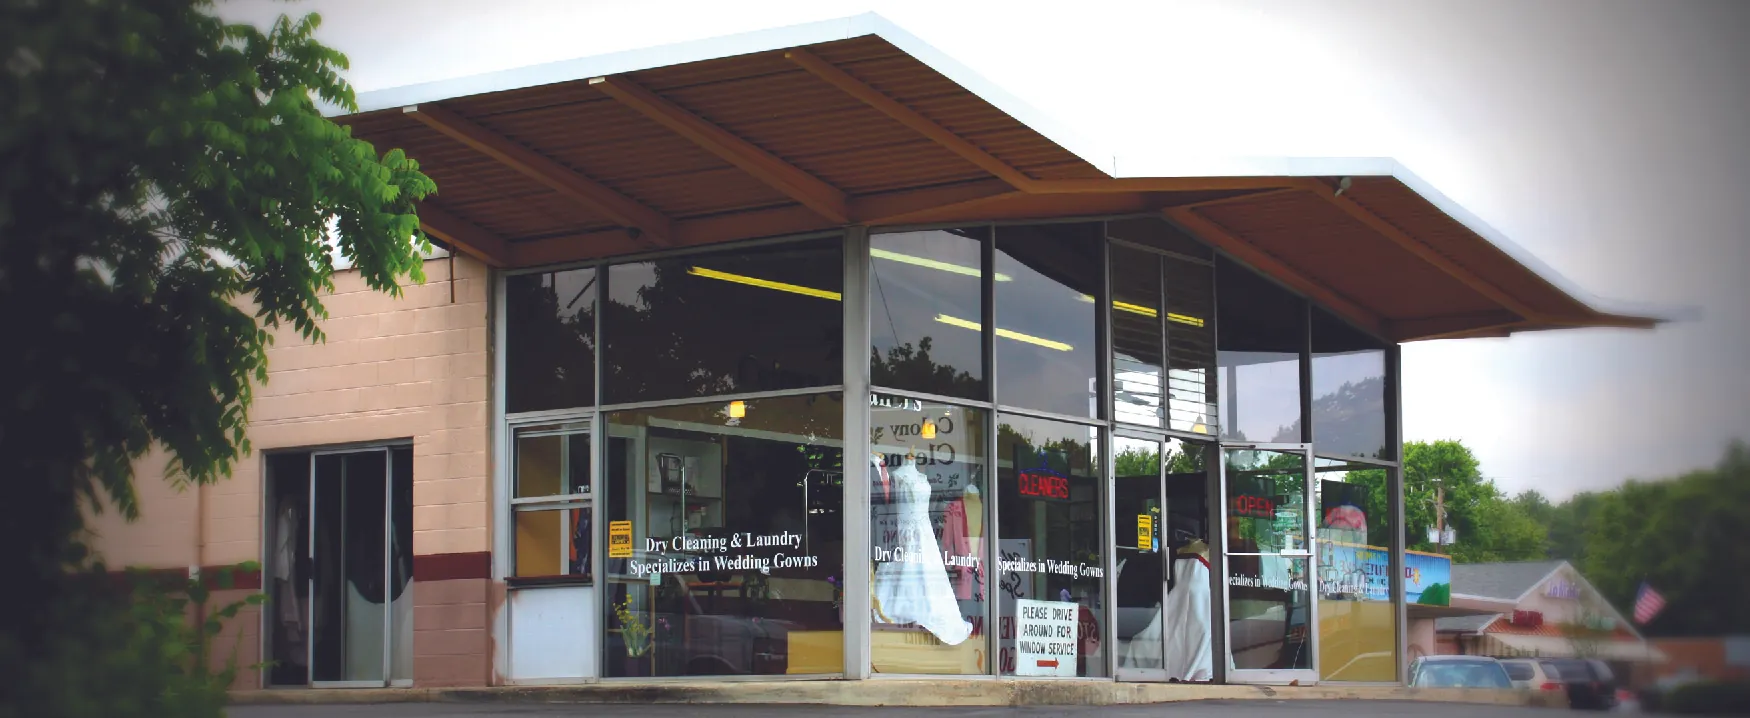 Exterior photograph of dry-cleaning business.